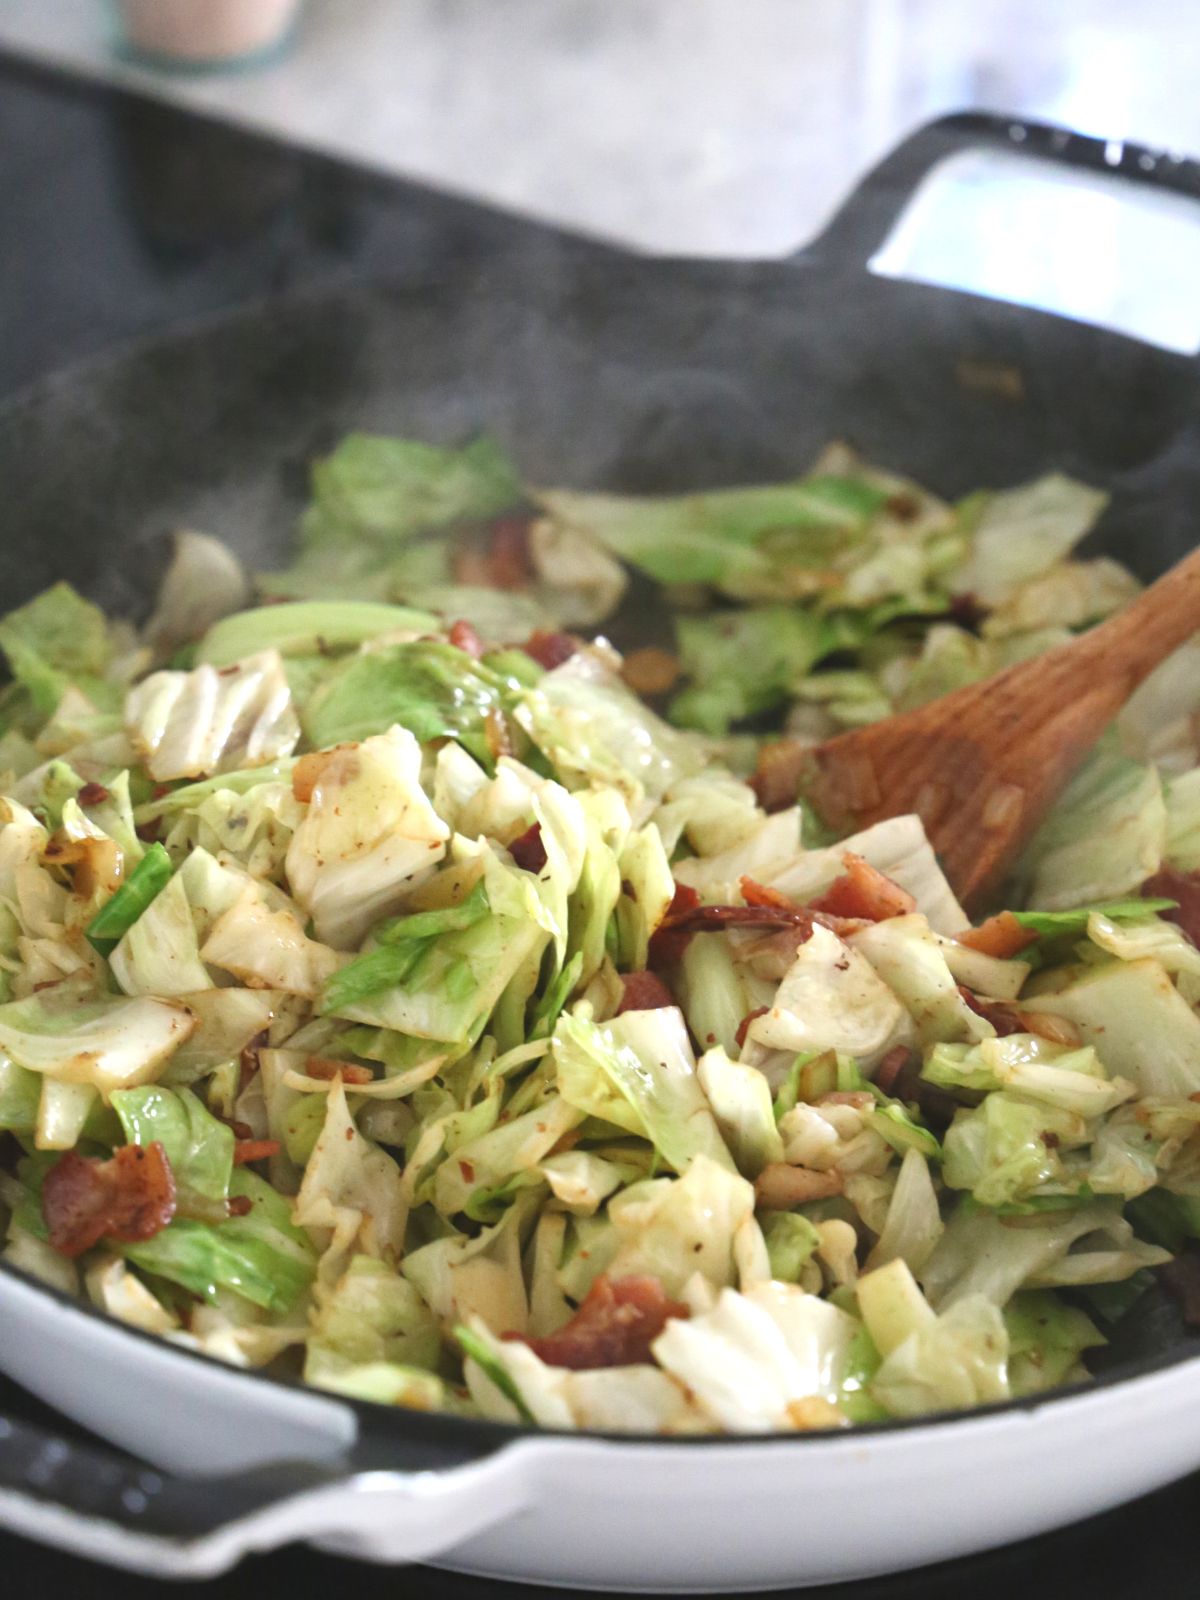 Cabbage frying in a pan.